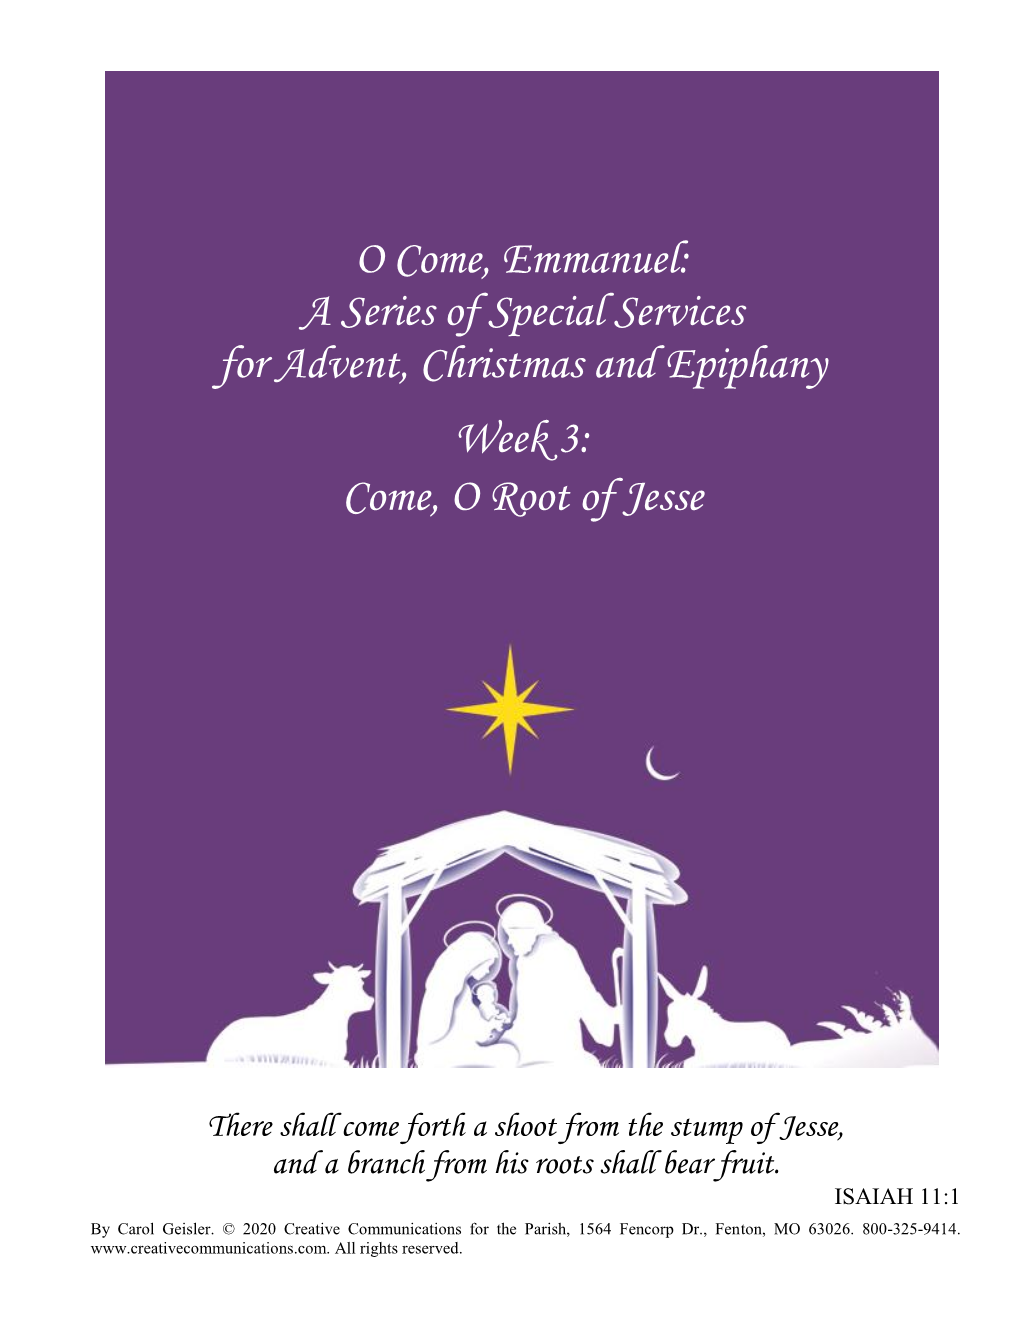 O Come, Emmanuel: a Series of Special Services for Advent, Christmas and Epiphany